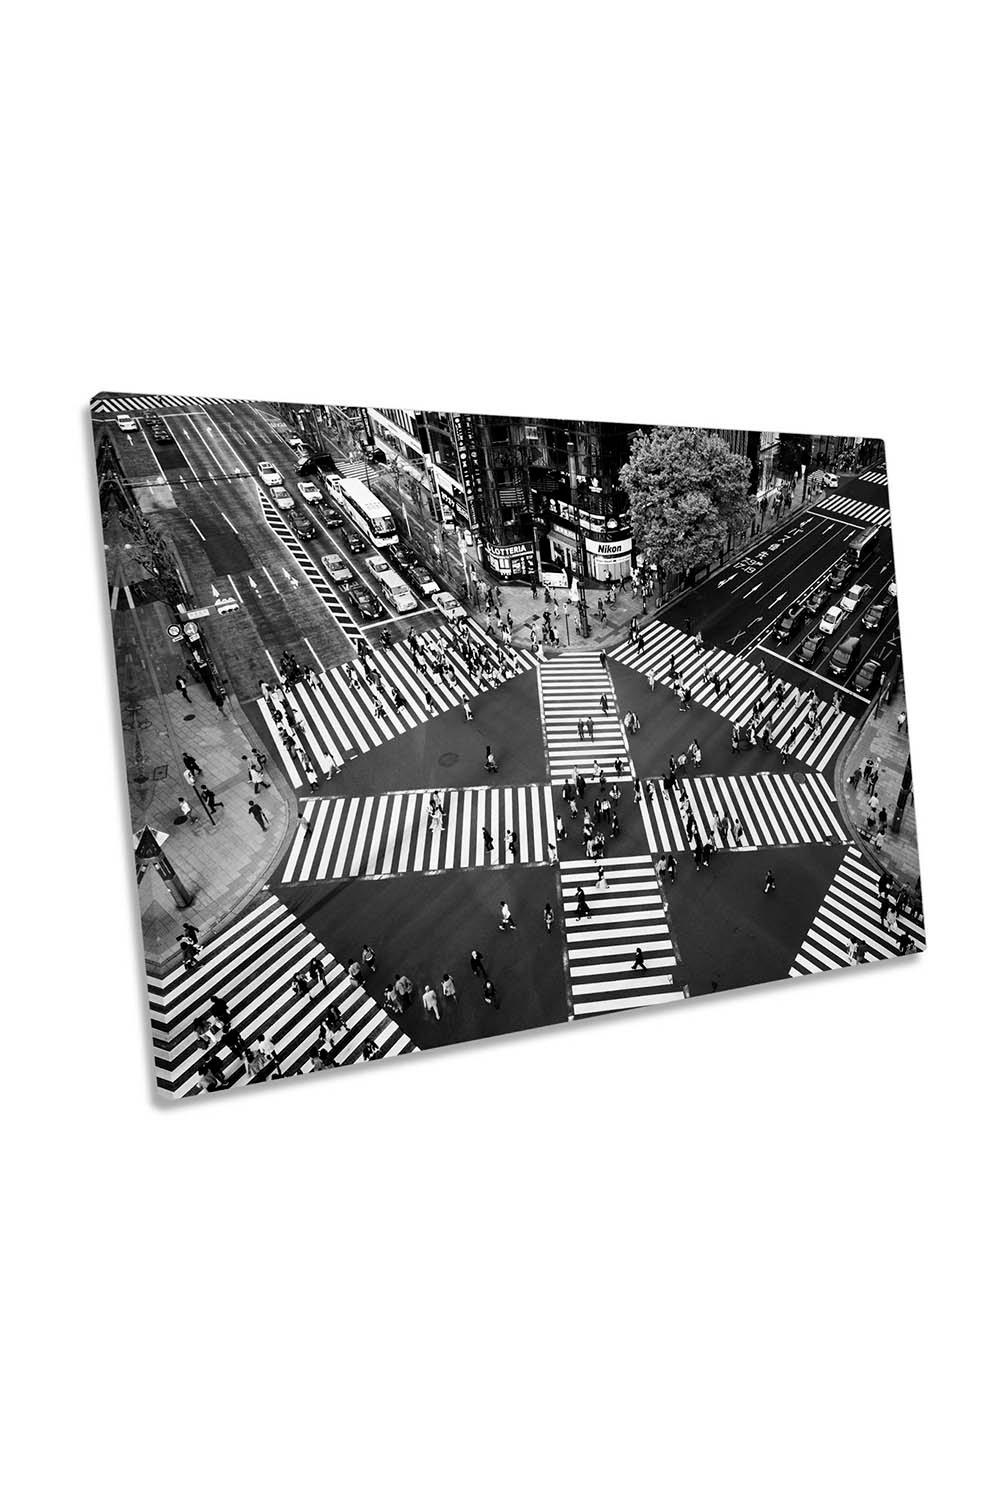 Ginza Tokyo Japan Urban Photography Canvas Wall Art Picture Print